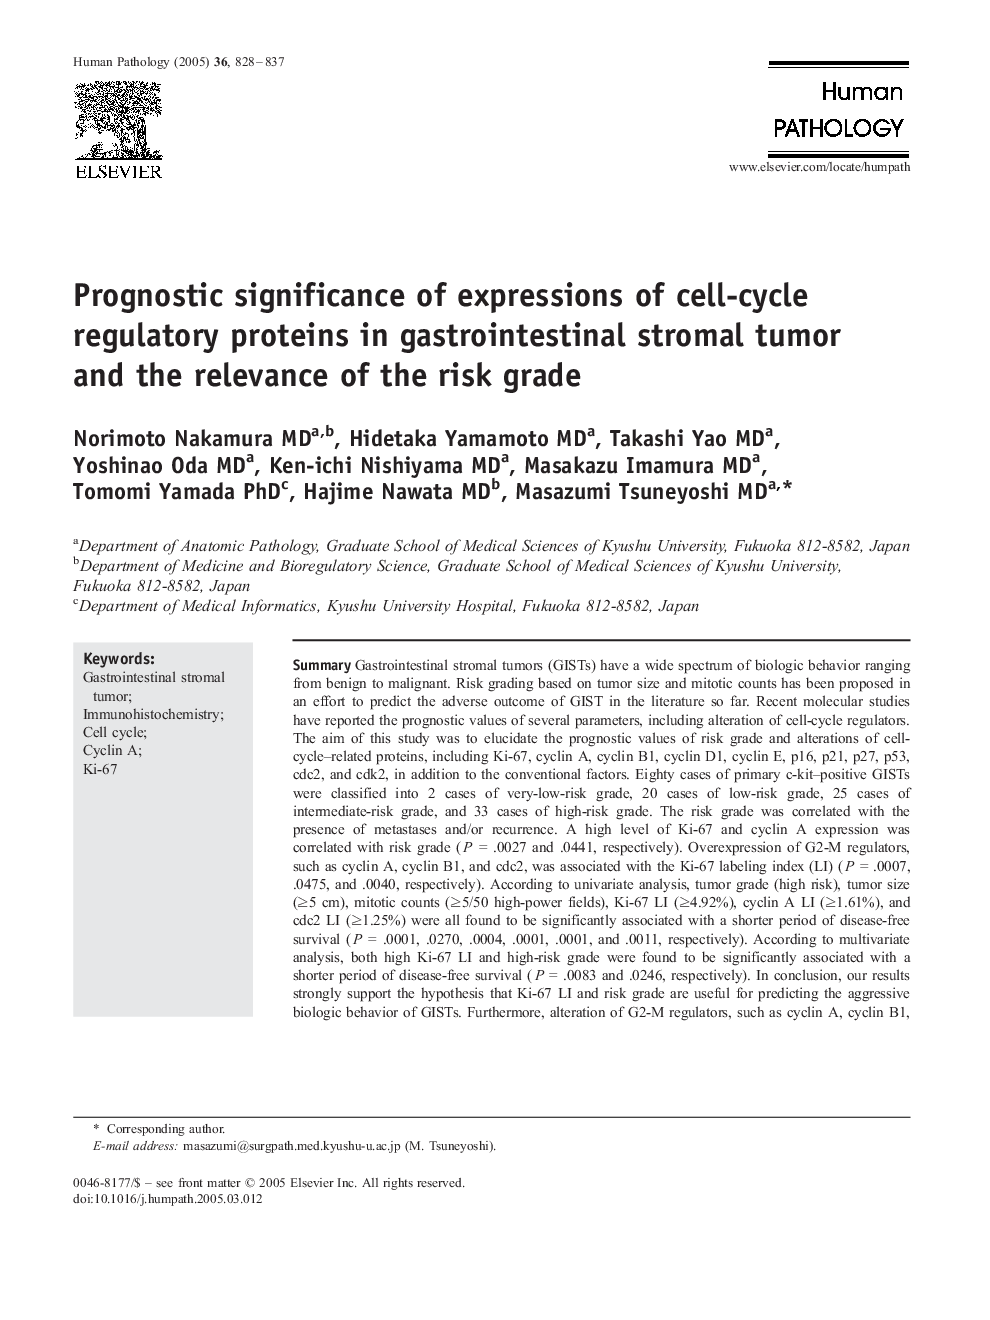 Prognostic significance of expressions of cell-cycle regulatory proteins in gastrointestinal stromal tumor and the relevance of the risk grade